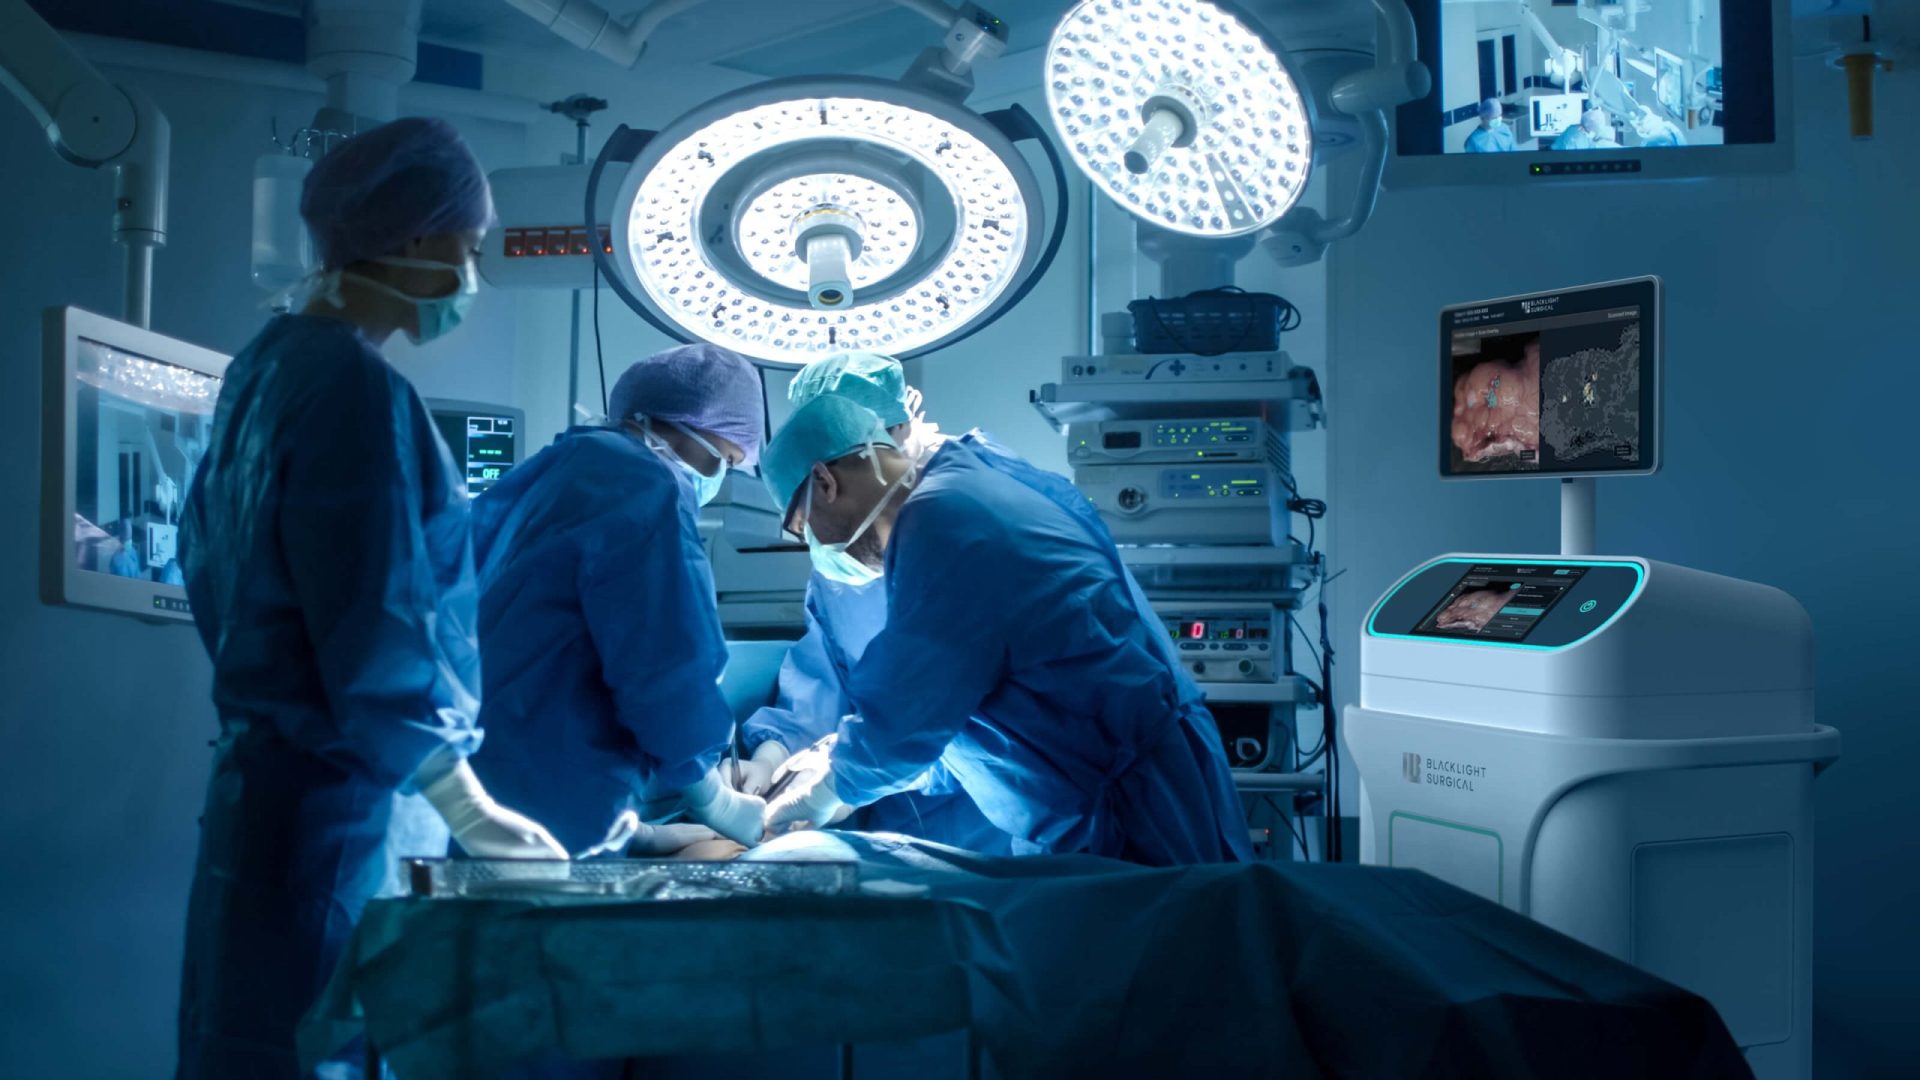 Medical team performing surgery in an operating room equipped with advanced technology.